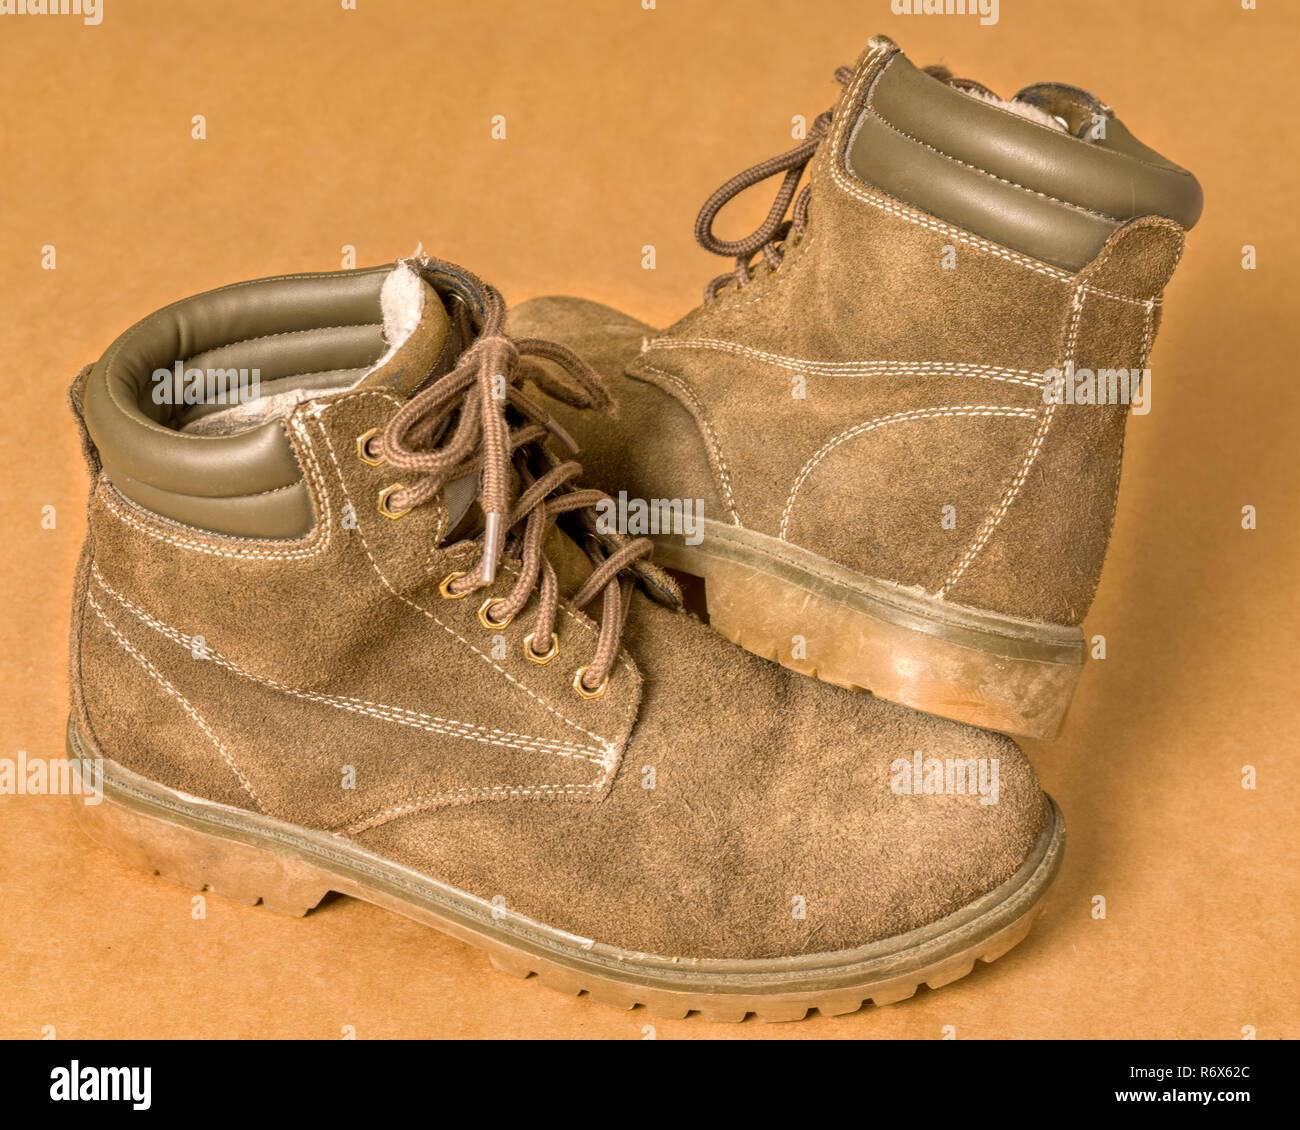 Sturdy insulated winter boots close up Stock Photo